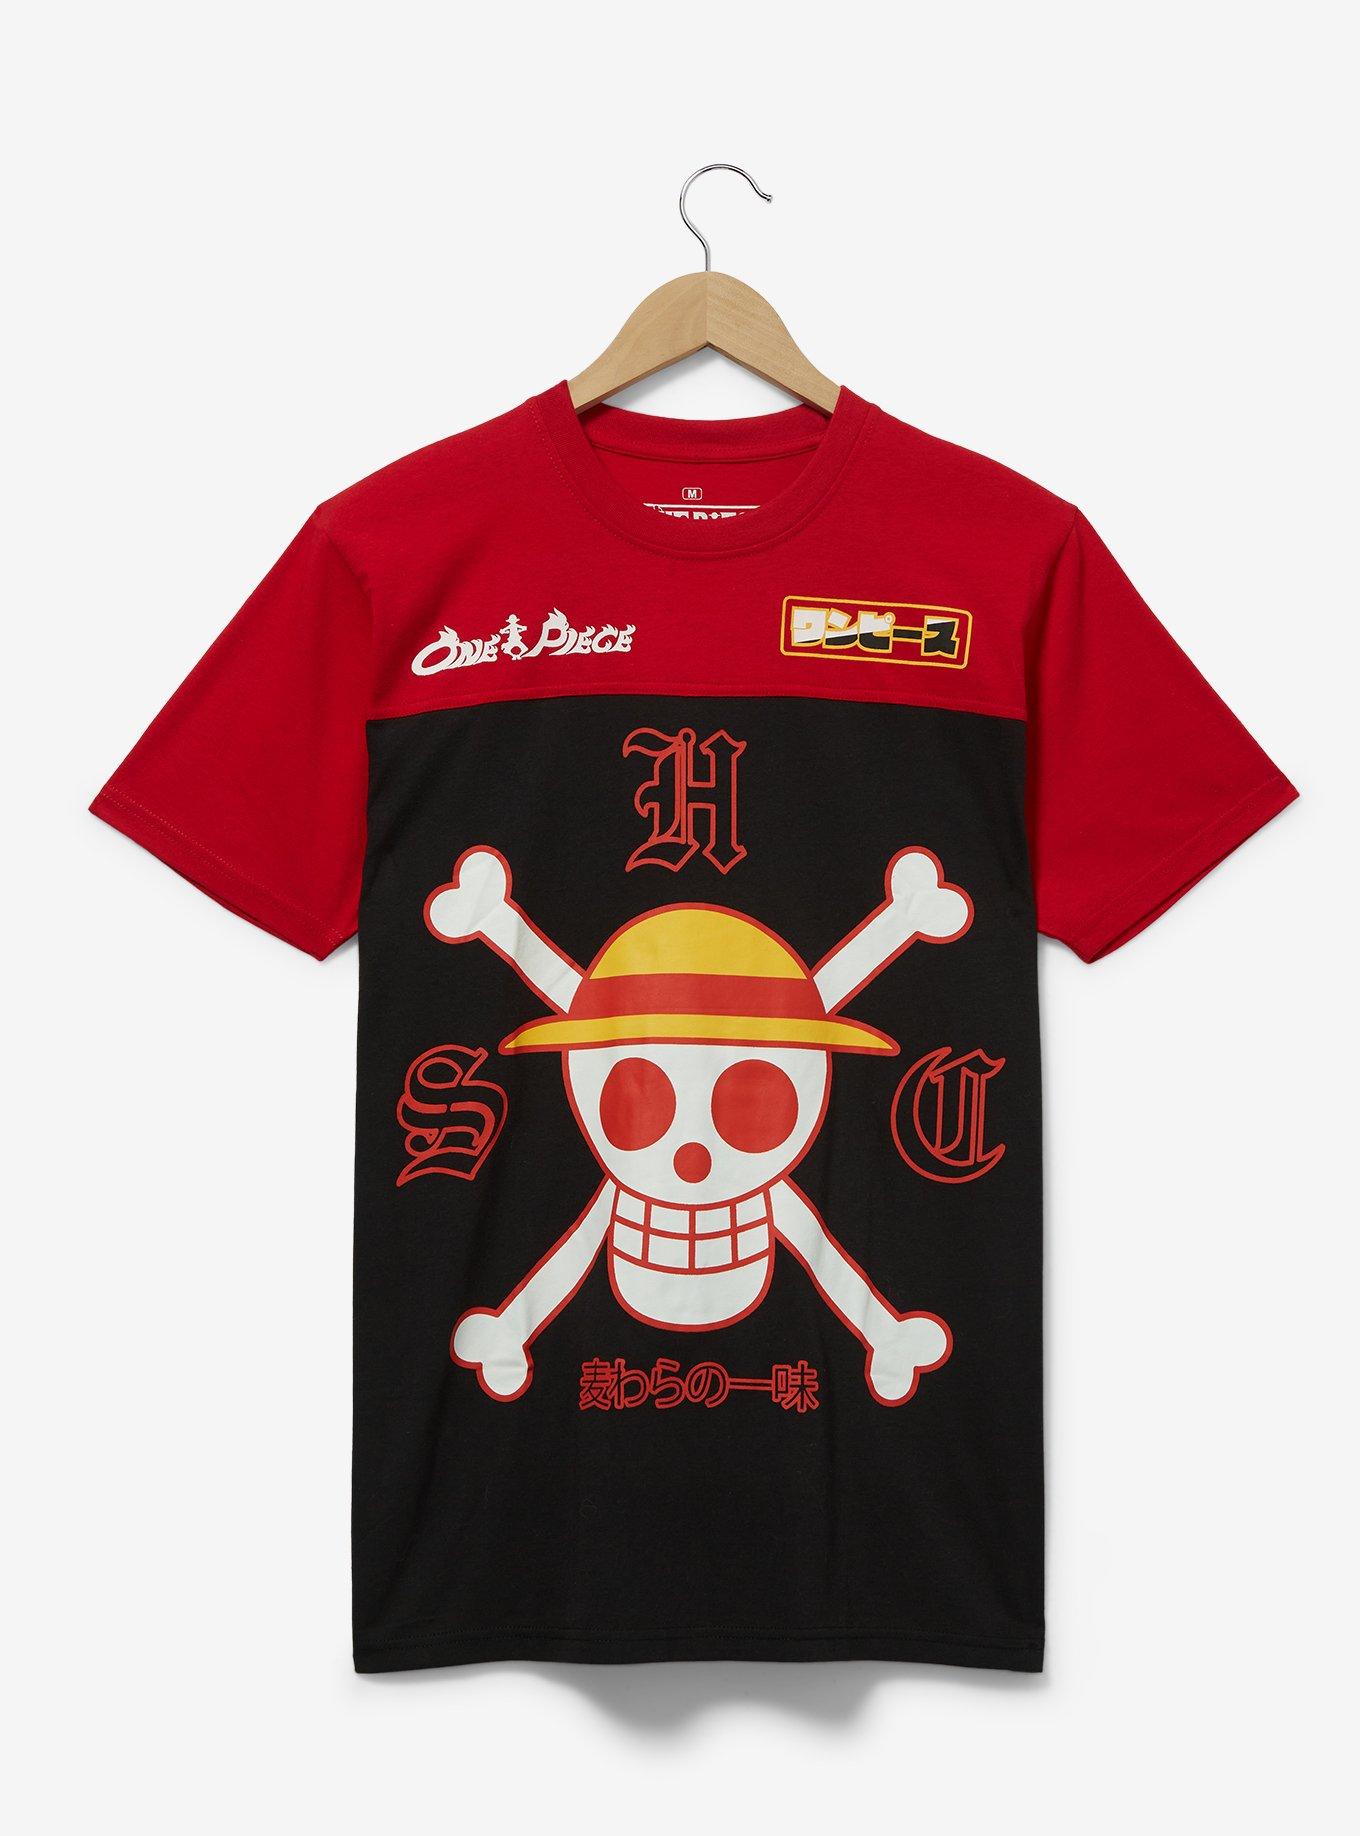 ABYSTYLE One Piece Straw Hat Jolly Roger Crew Gift Set Includes